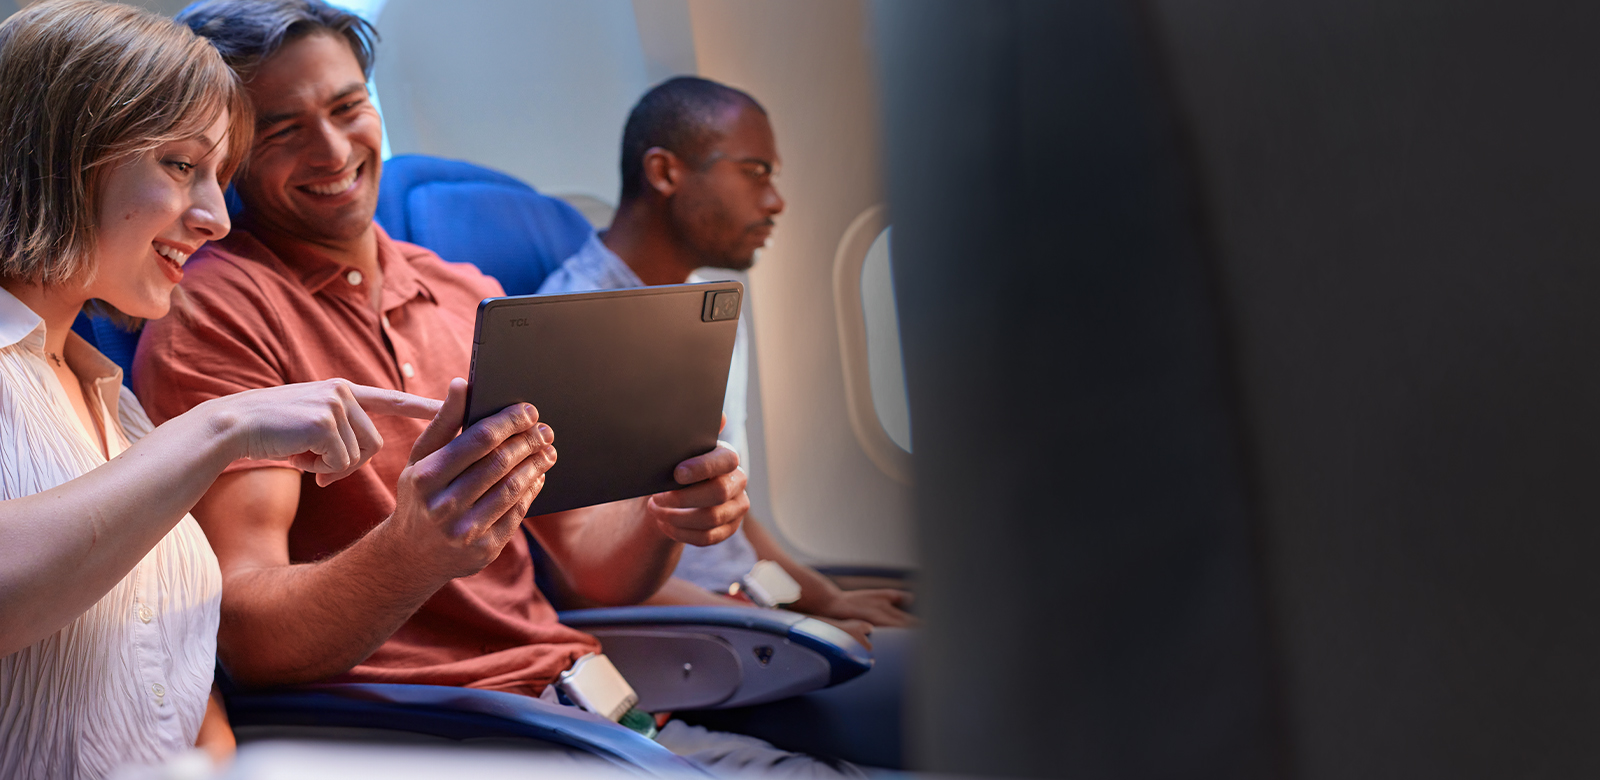 couple watching movie on plane